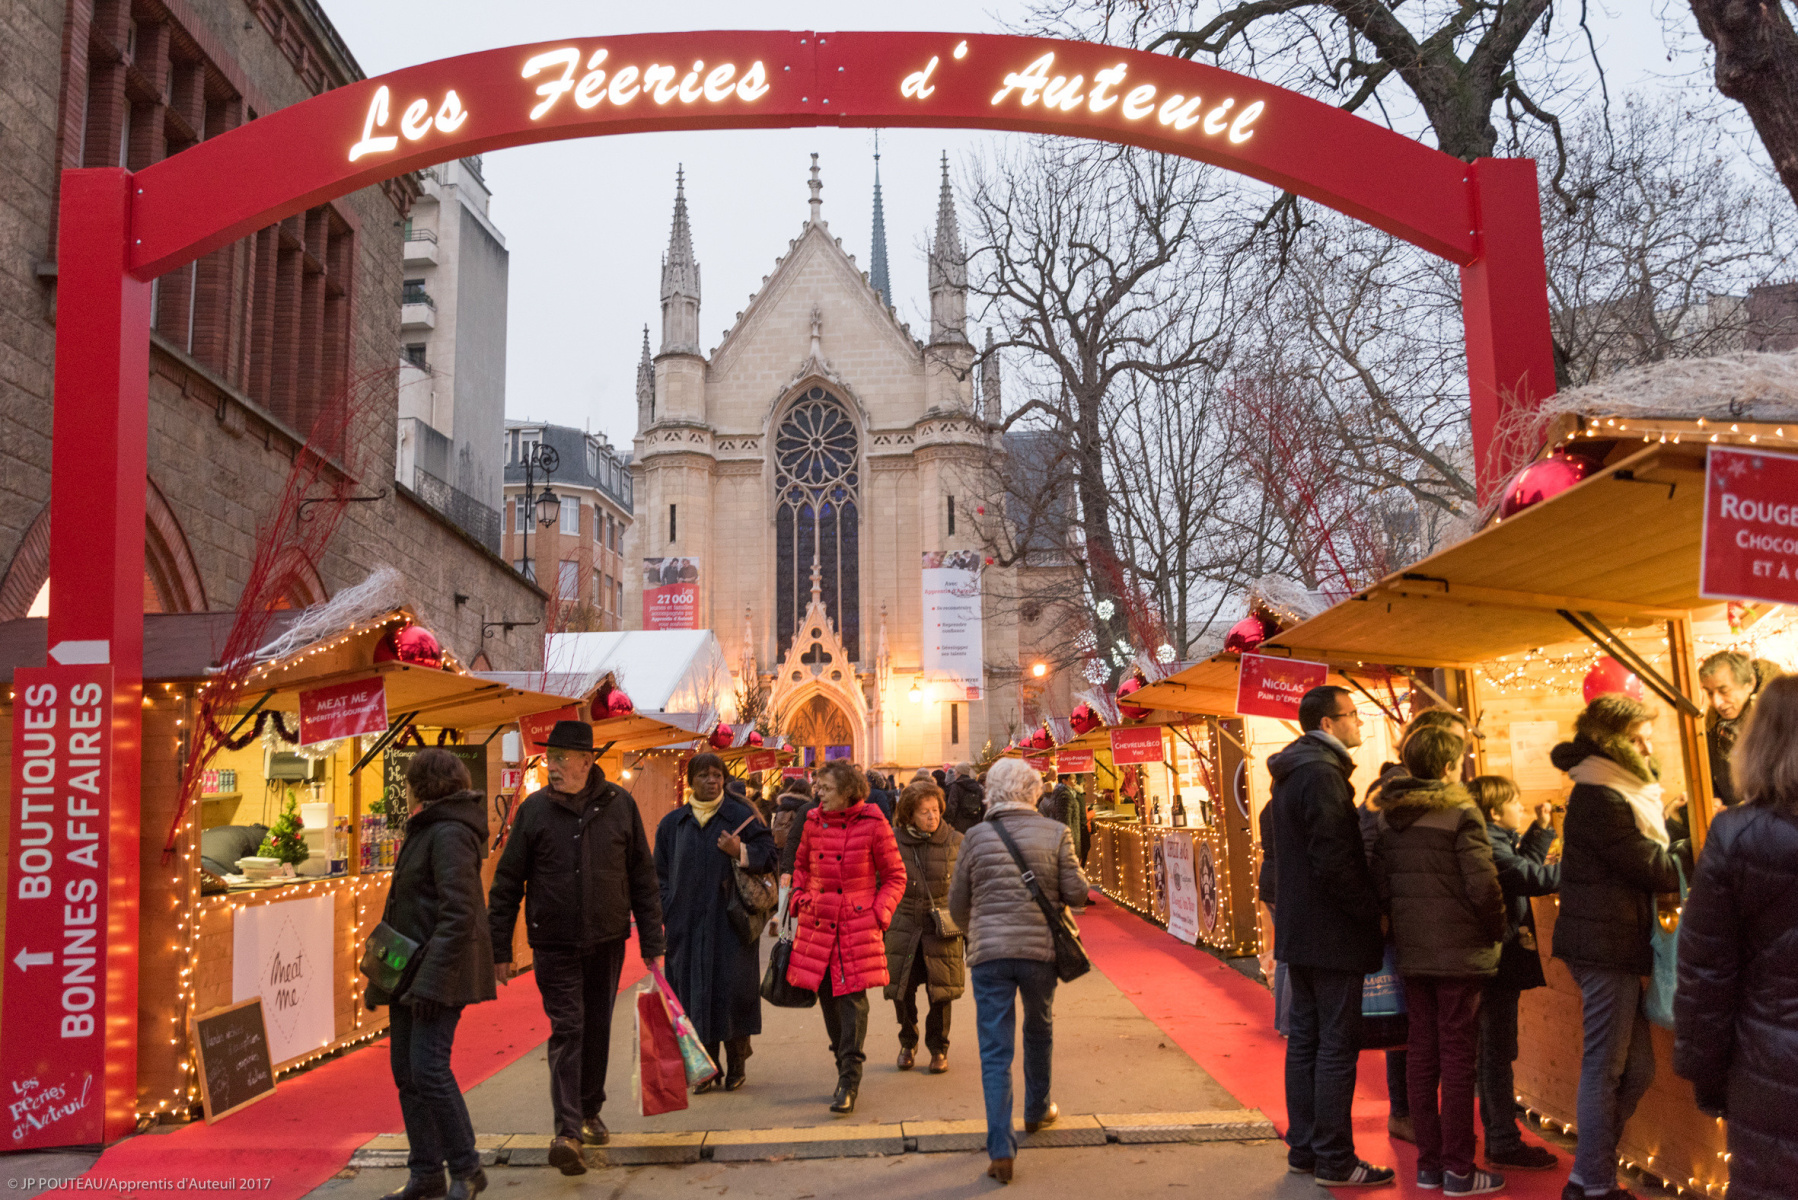 Fééries d'Auteuil Christmas Market is one of the most unforgettable Christmas markets in Paris